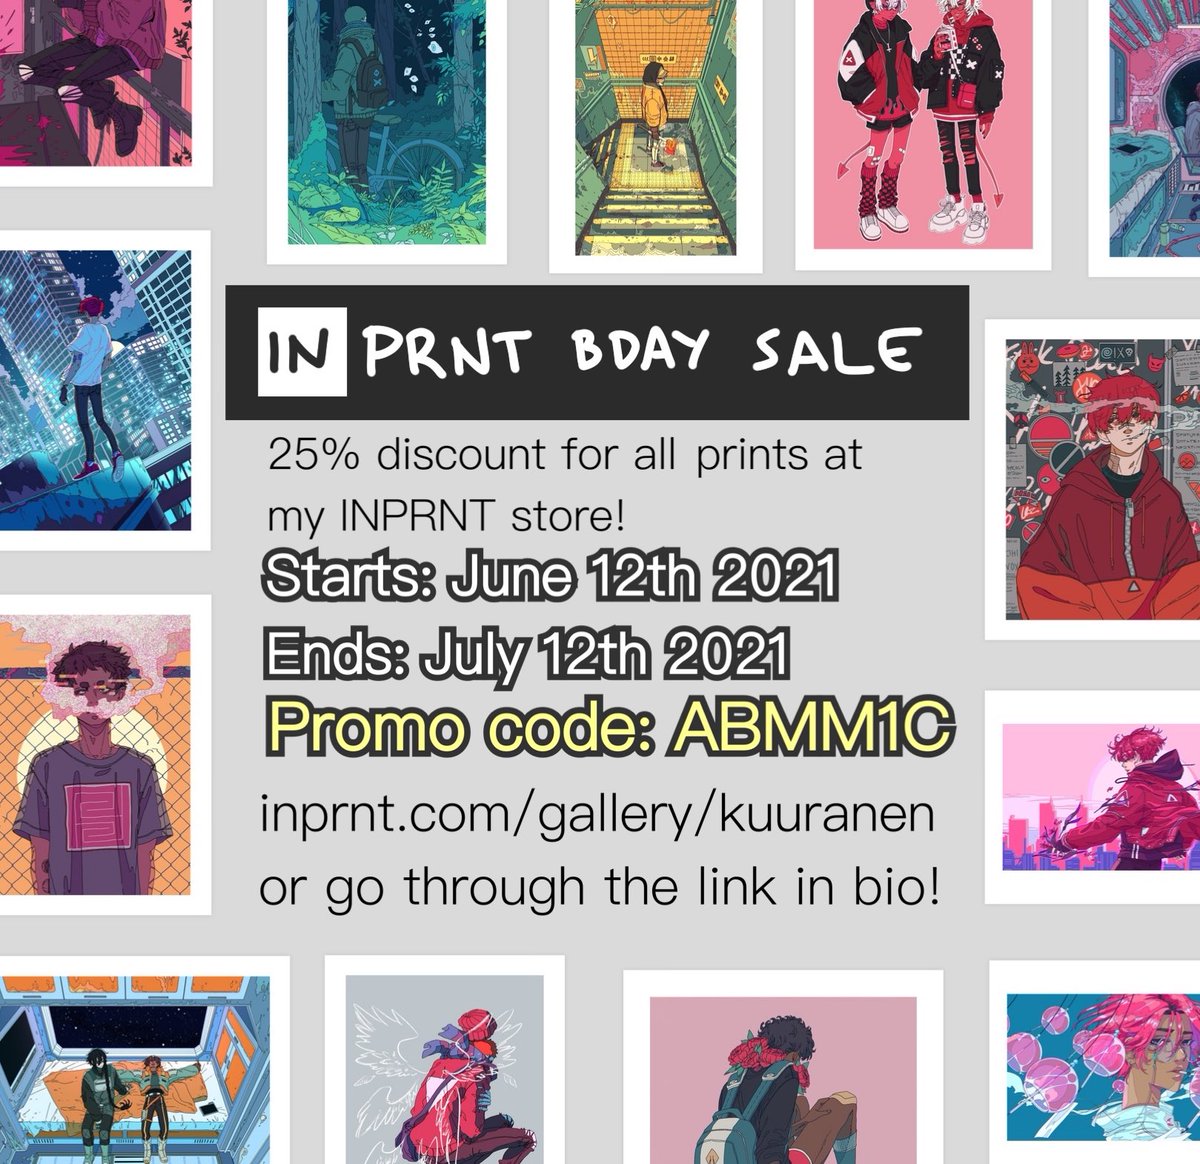 I added this to my print shop!! Reminder that I have a 25% discount code ABMM1C that's valid until July 12th for all print orders in my shop 🙏 
https://t.co/4Hh7pF4vc9 